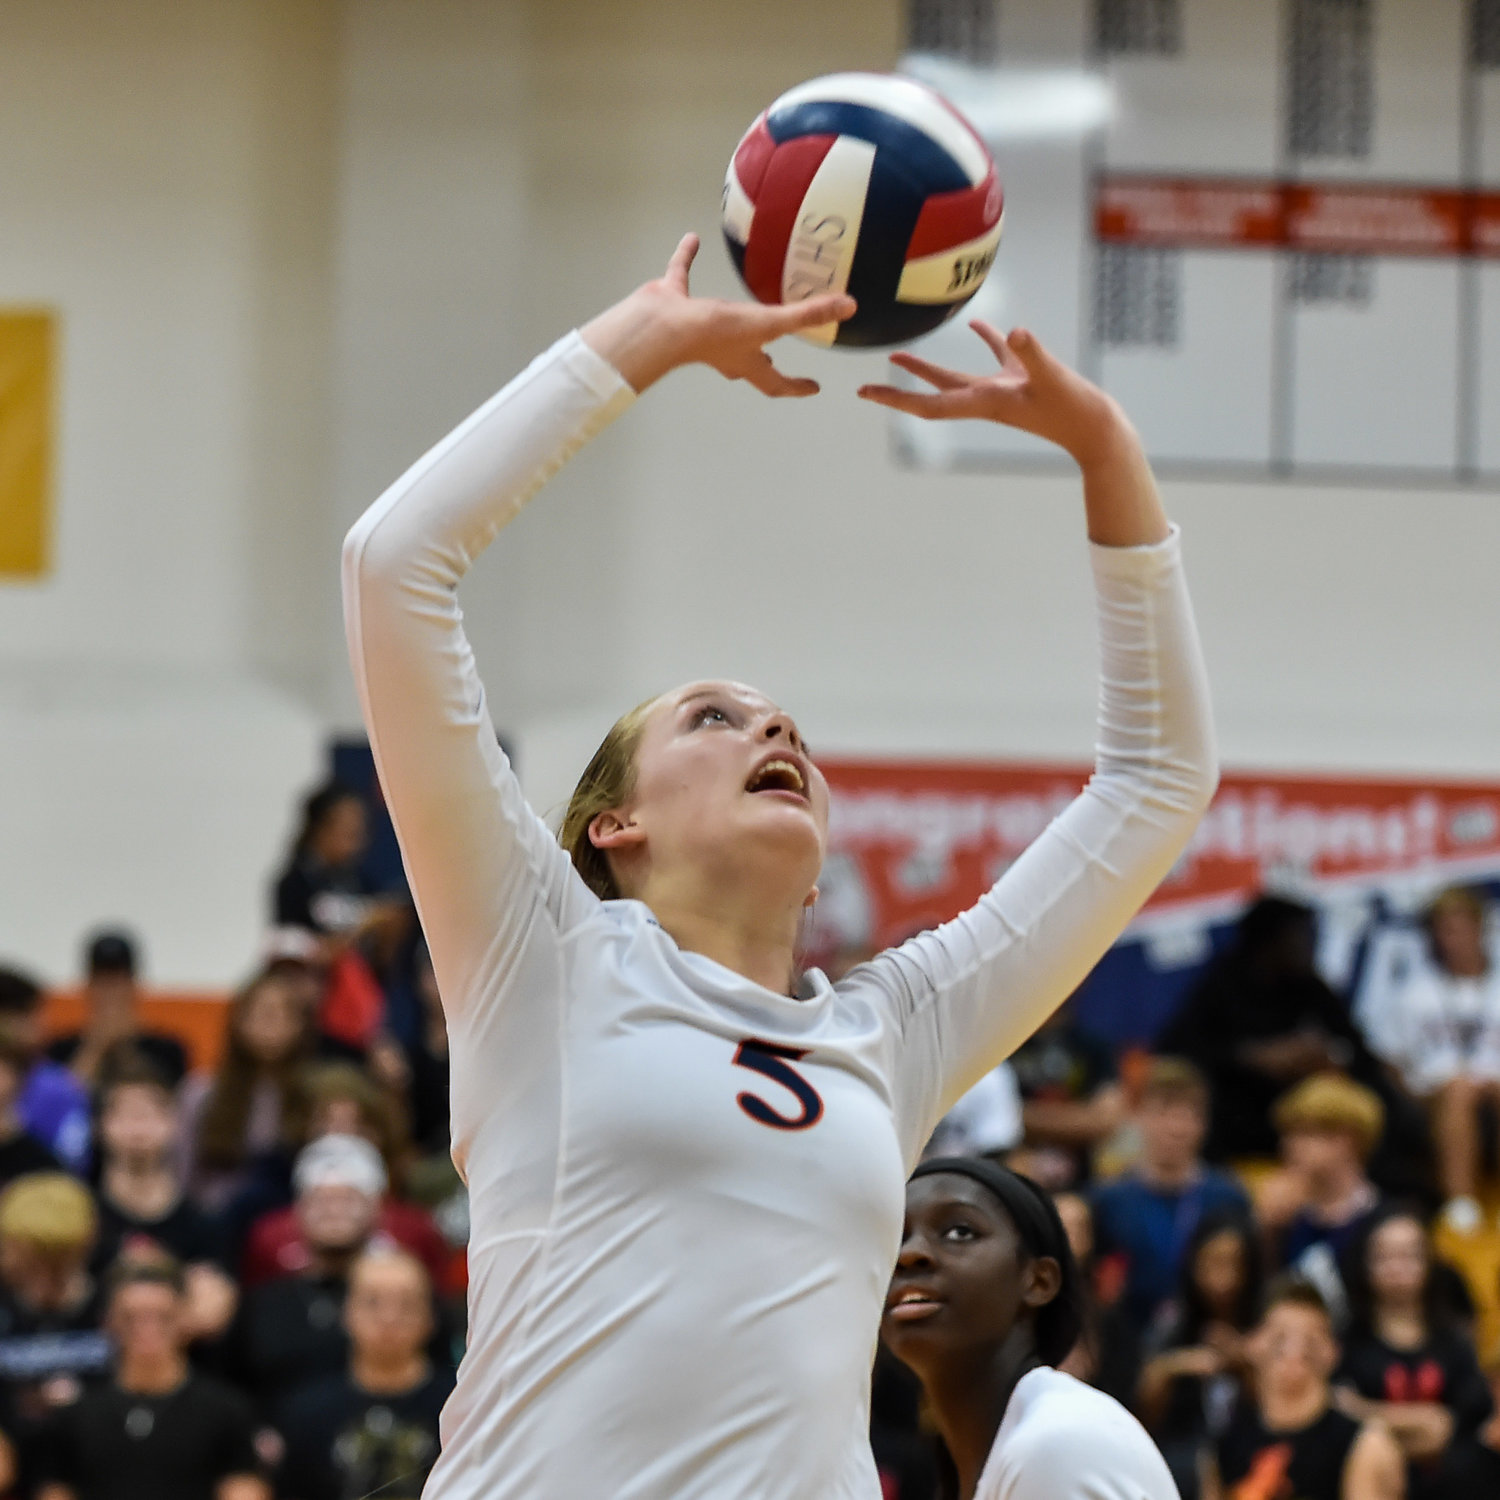 Katy Tx. Sept 24, 2019:  Seven Lakes Casey Batenhorst (5) sets up a shot during a conference high school volleyball game between Katy and Seven Lakes at SLHS.  (Photo by Mark Goodman / Katy Times)